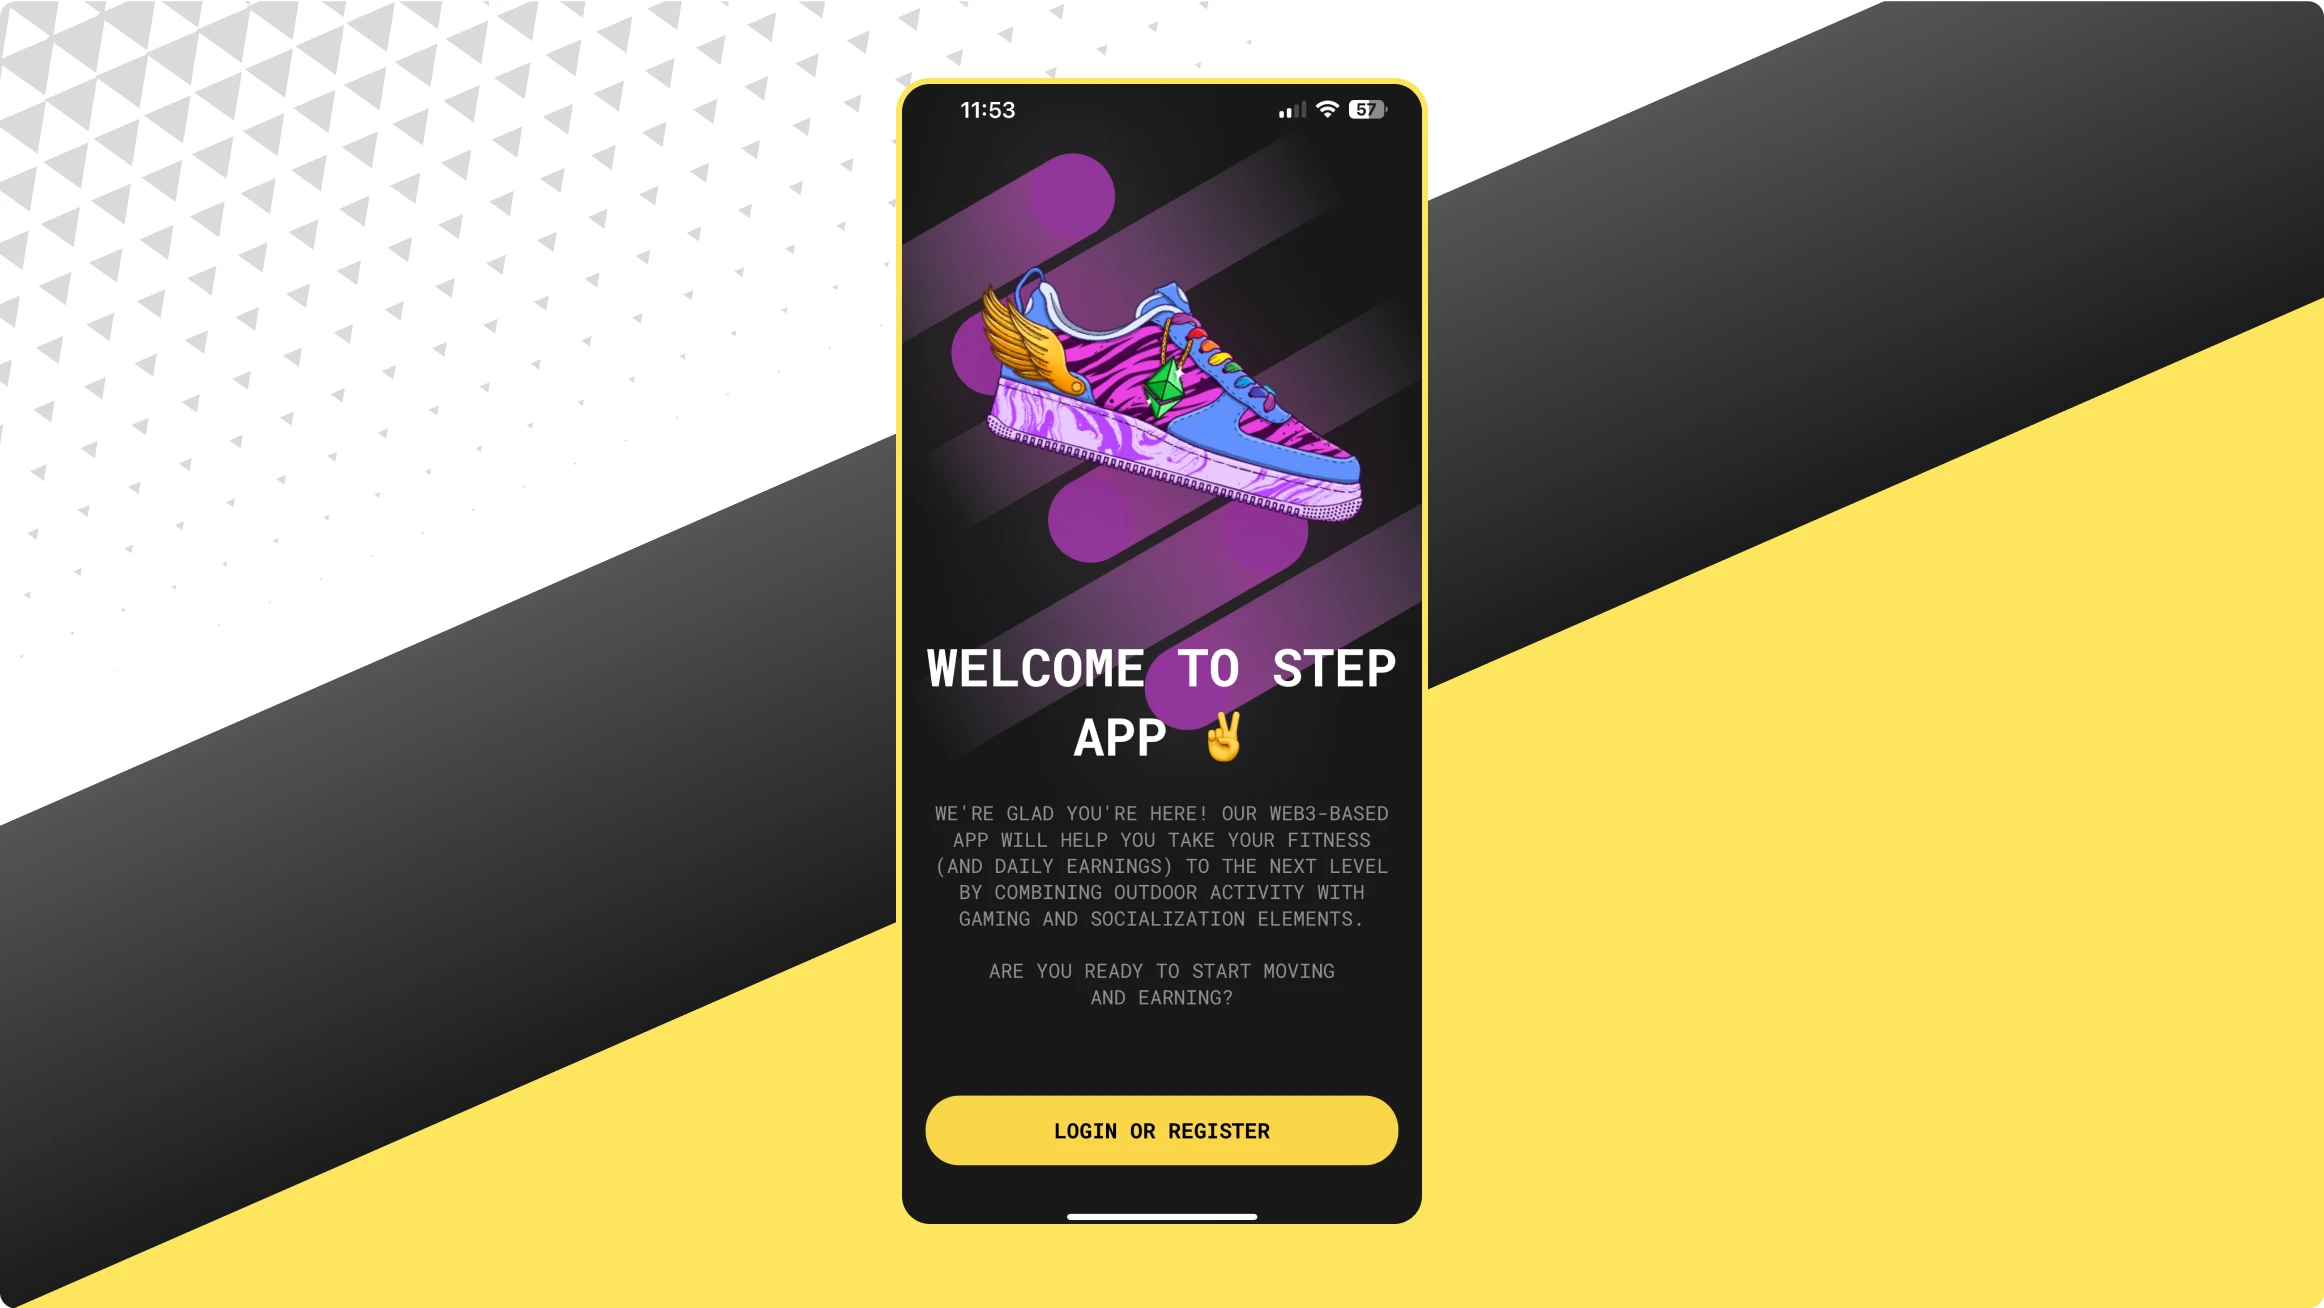 How to get 30% discount on Step App? 2